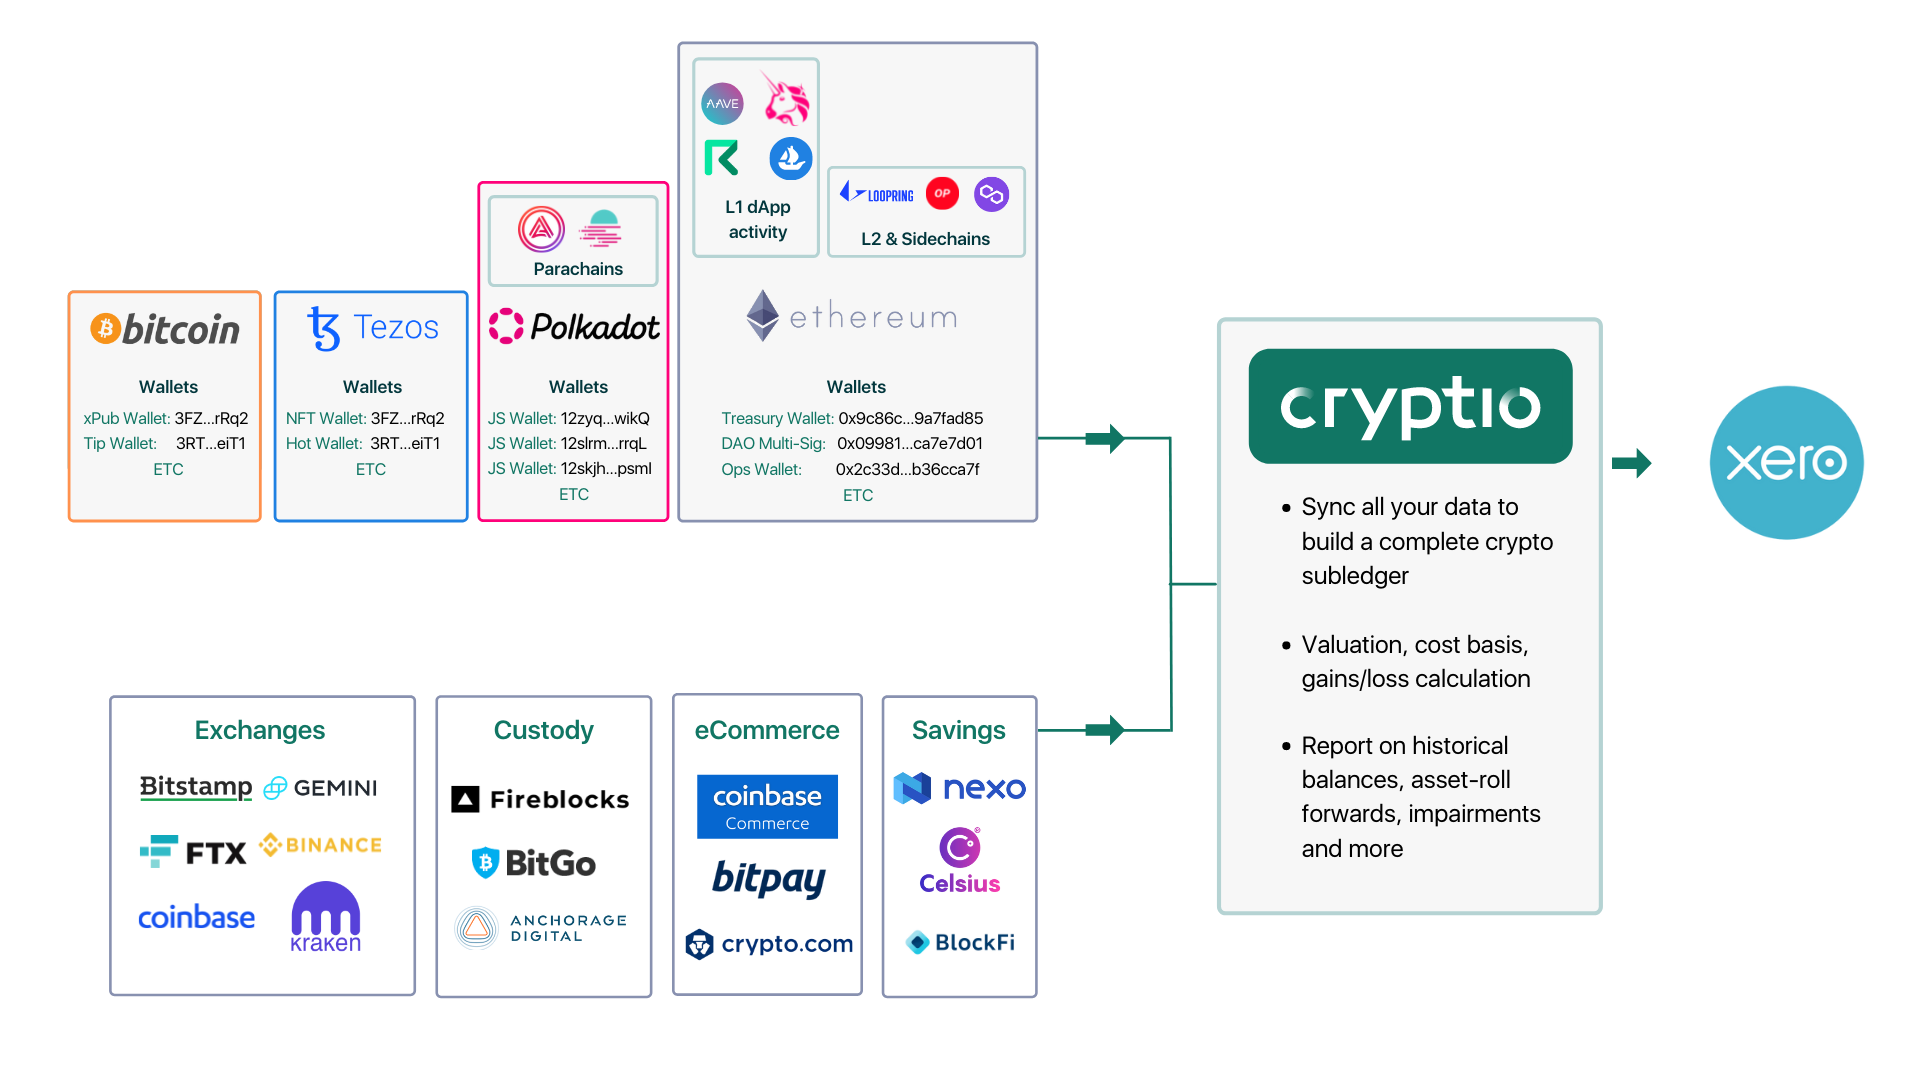 Photo courtesy of Hermant Pandit, Head of Marketing at Cryptio